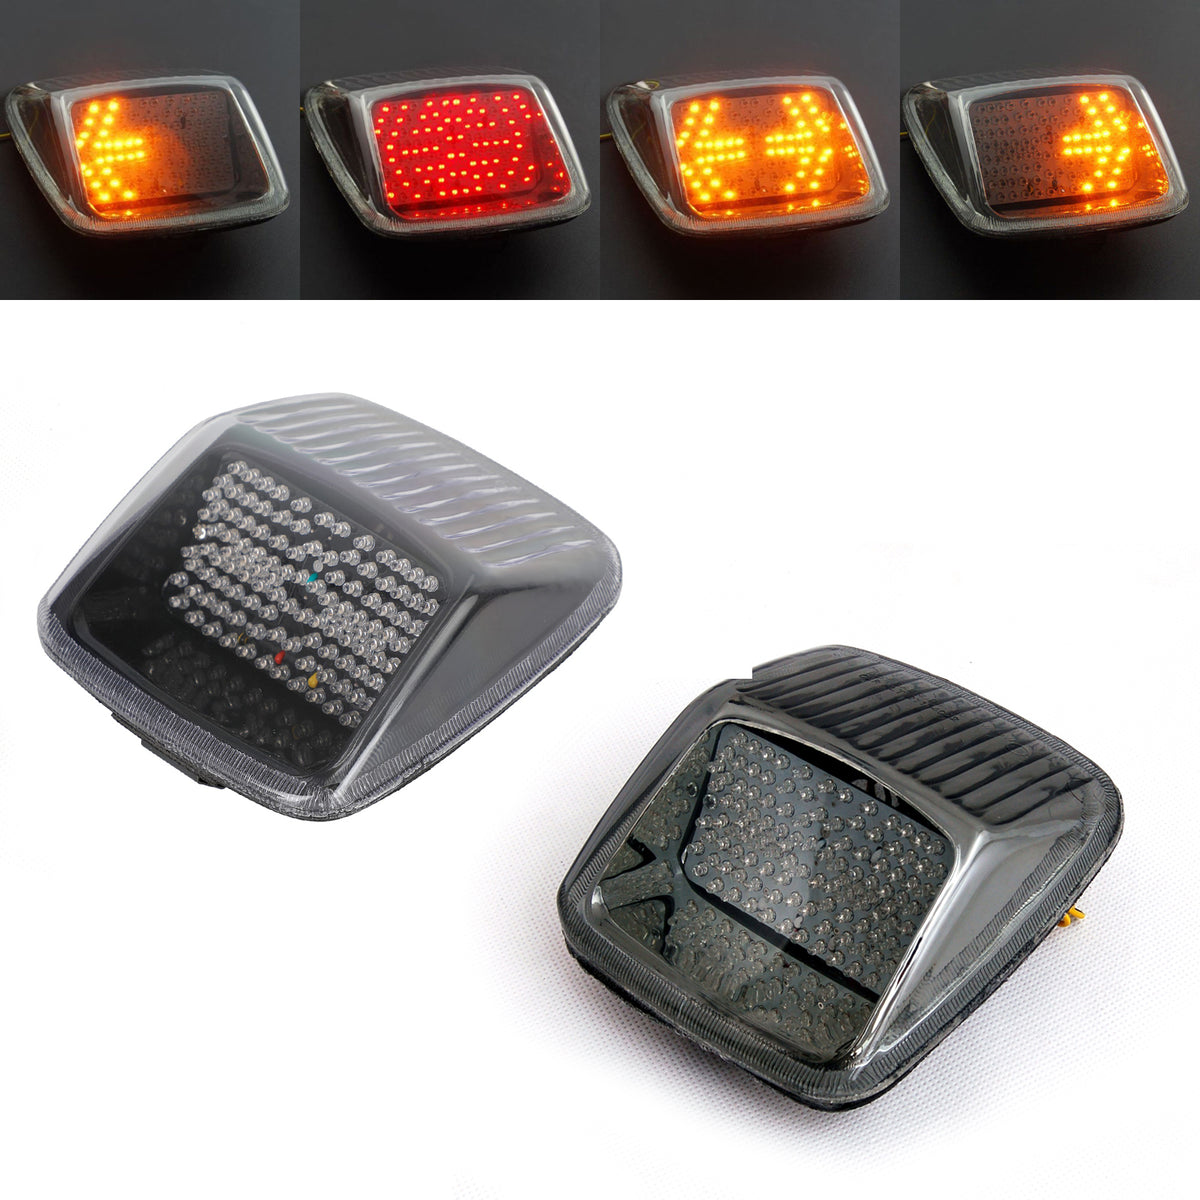 Taillight + Turn Signals for V-ROD Night Rod Street Rod 2002-2011 Clear